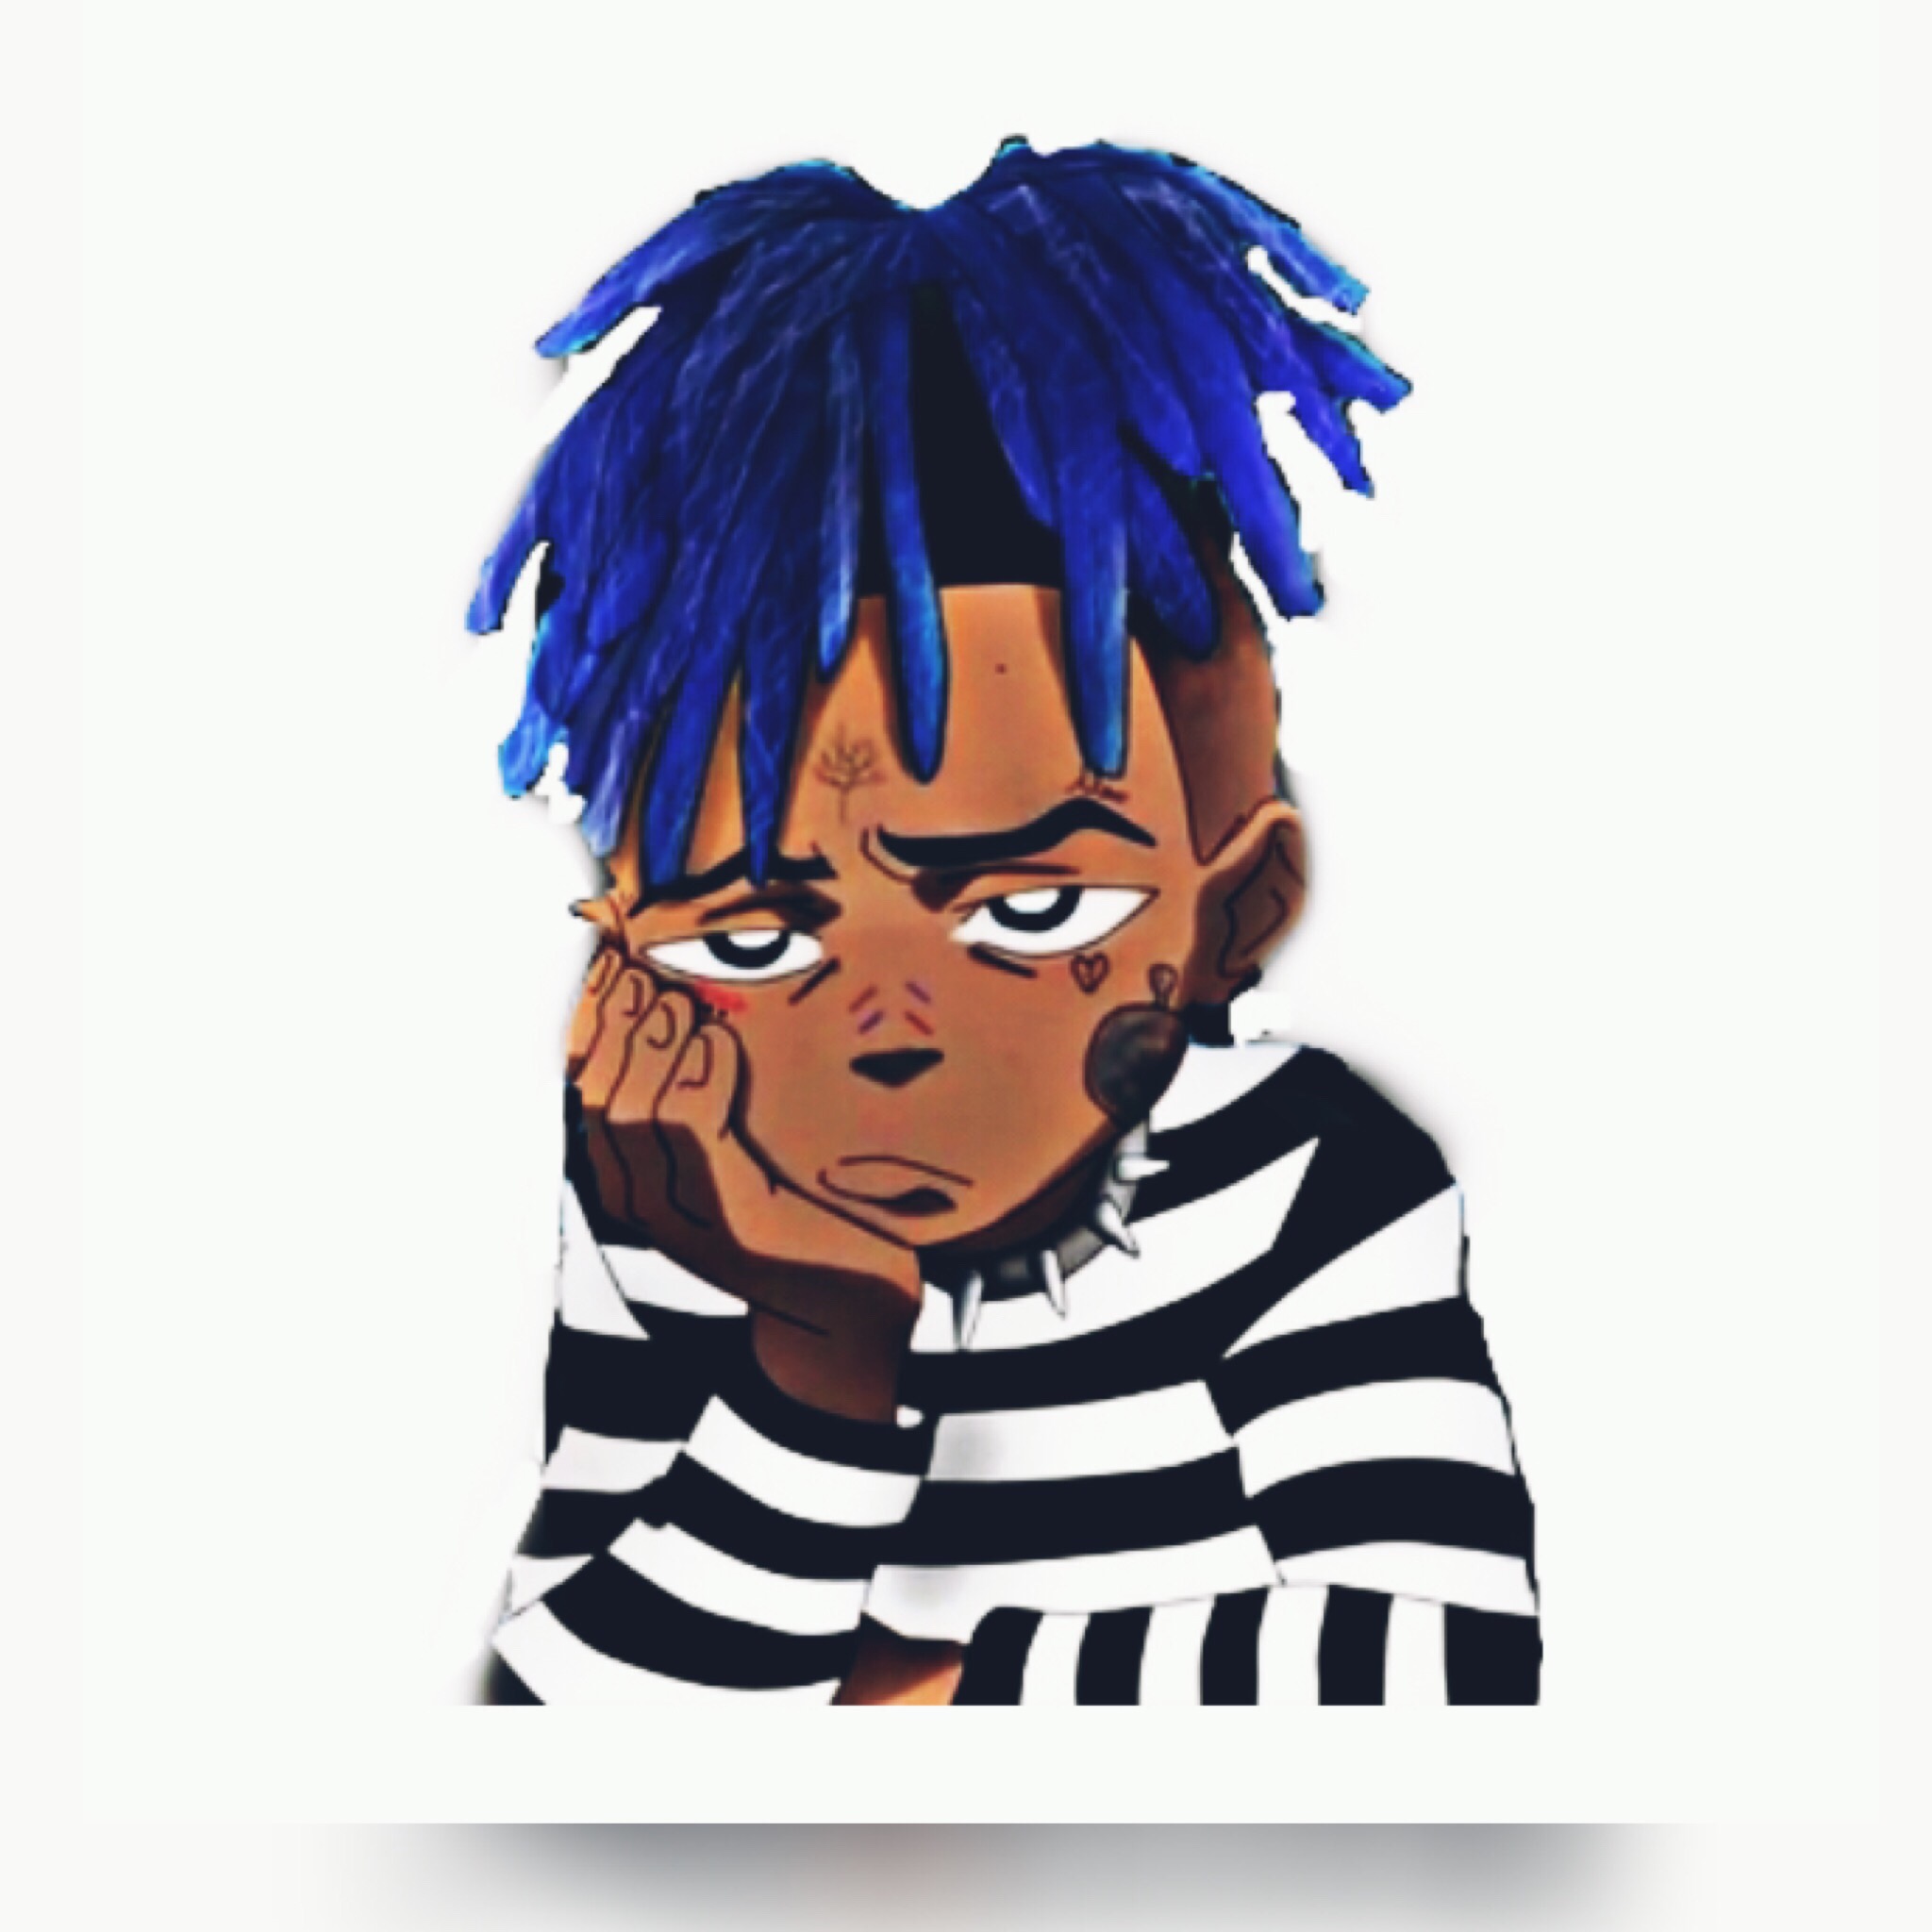 Largest Collection of Free-to-Edit xxxtentacion Images on PicsArt